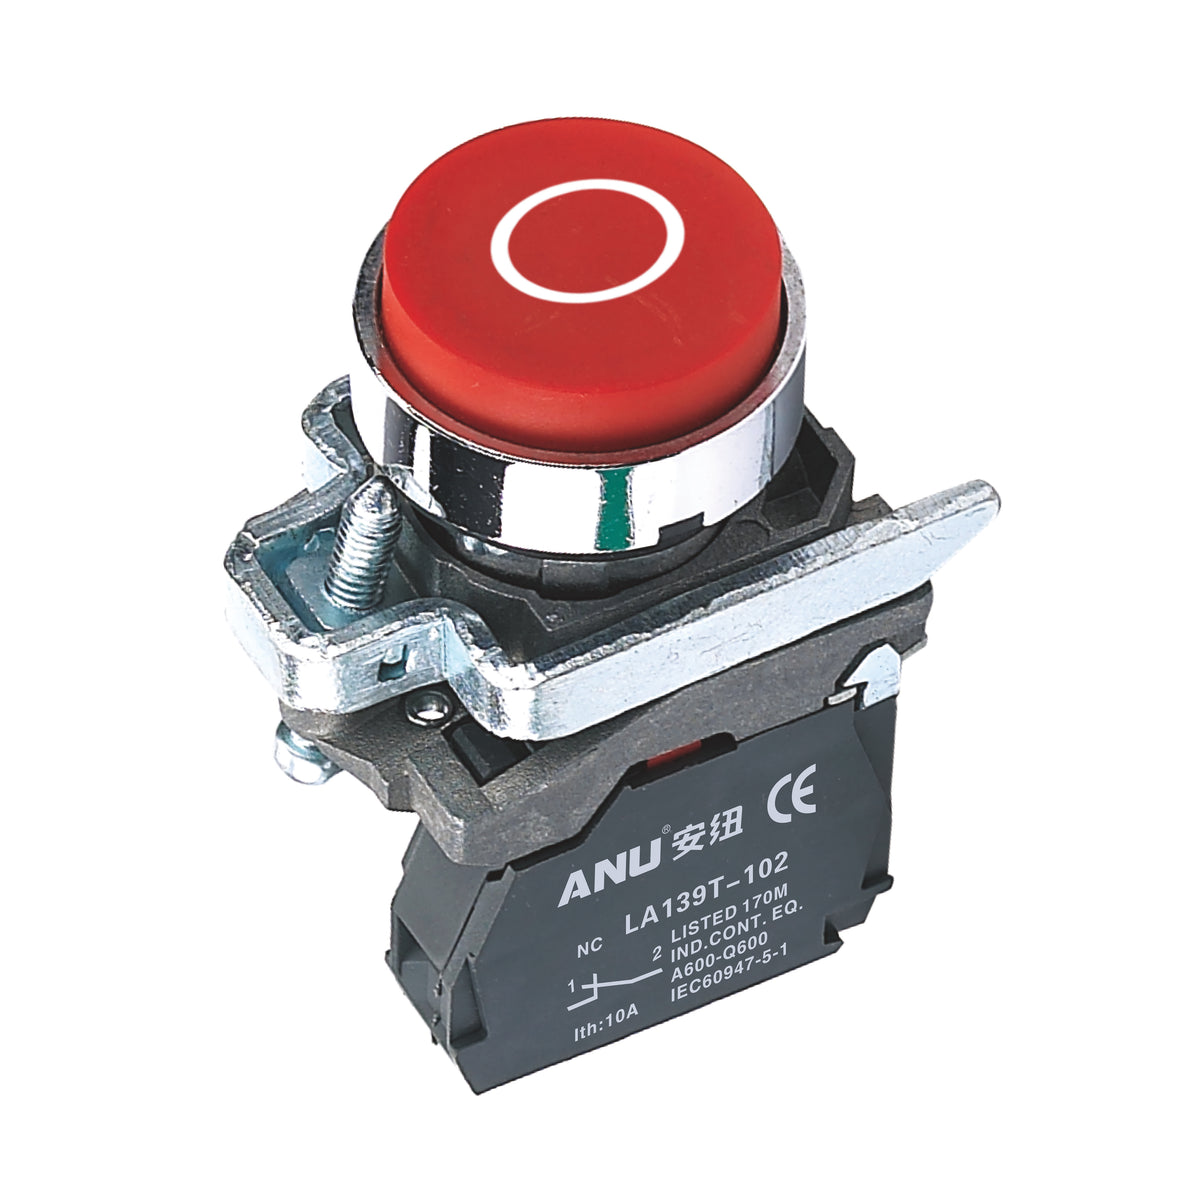 Metal Push Button Switch Momentary Flat Head white circle on red Background 1 Normally-Closed